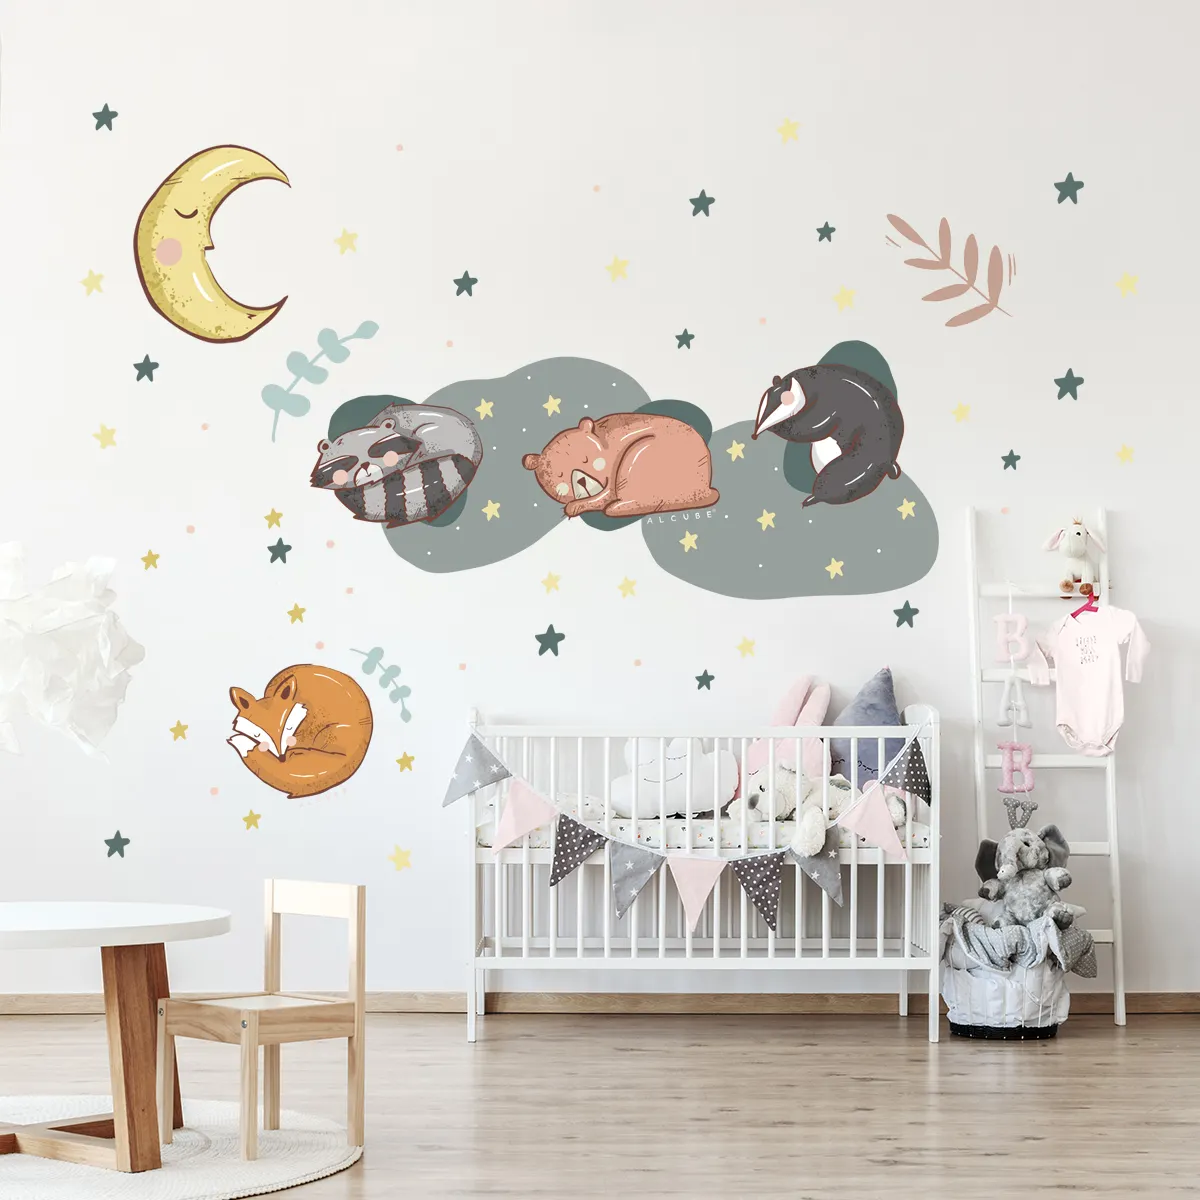 Custom Kid Dream Theme Self-adhesive Removable Printing Decal PVC Waterproof Star Home Decoration Wall Sticker for Kids Room